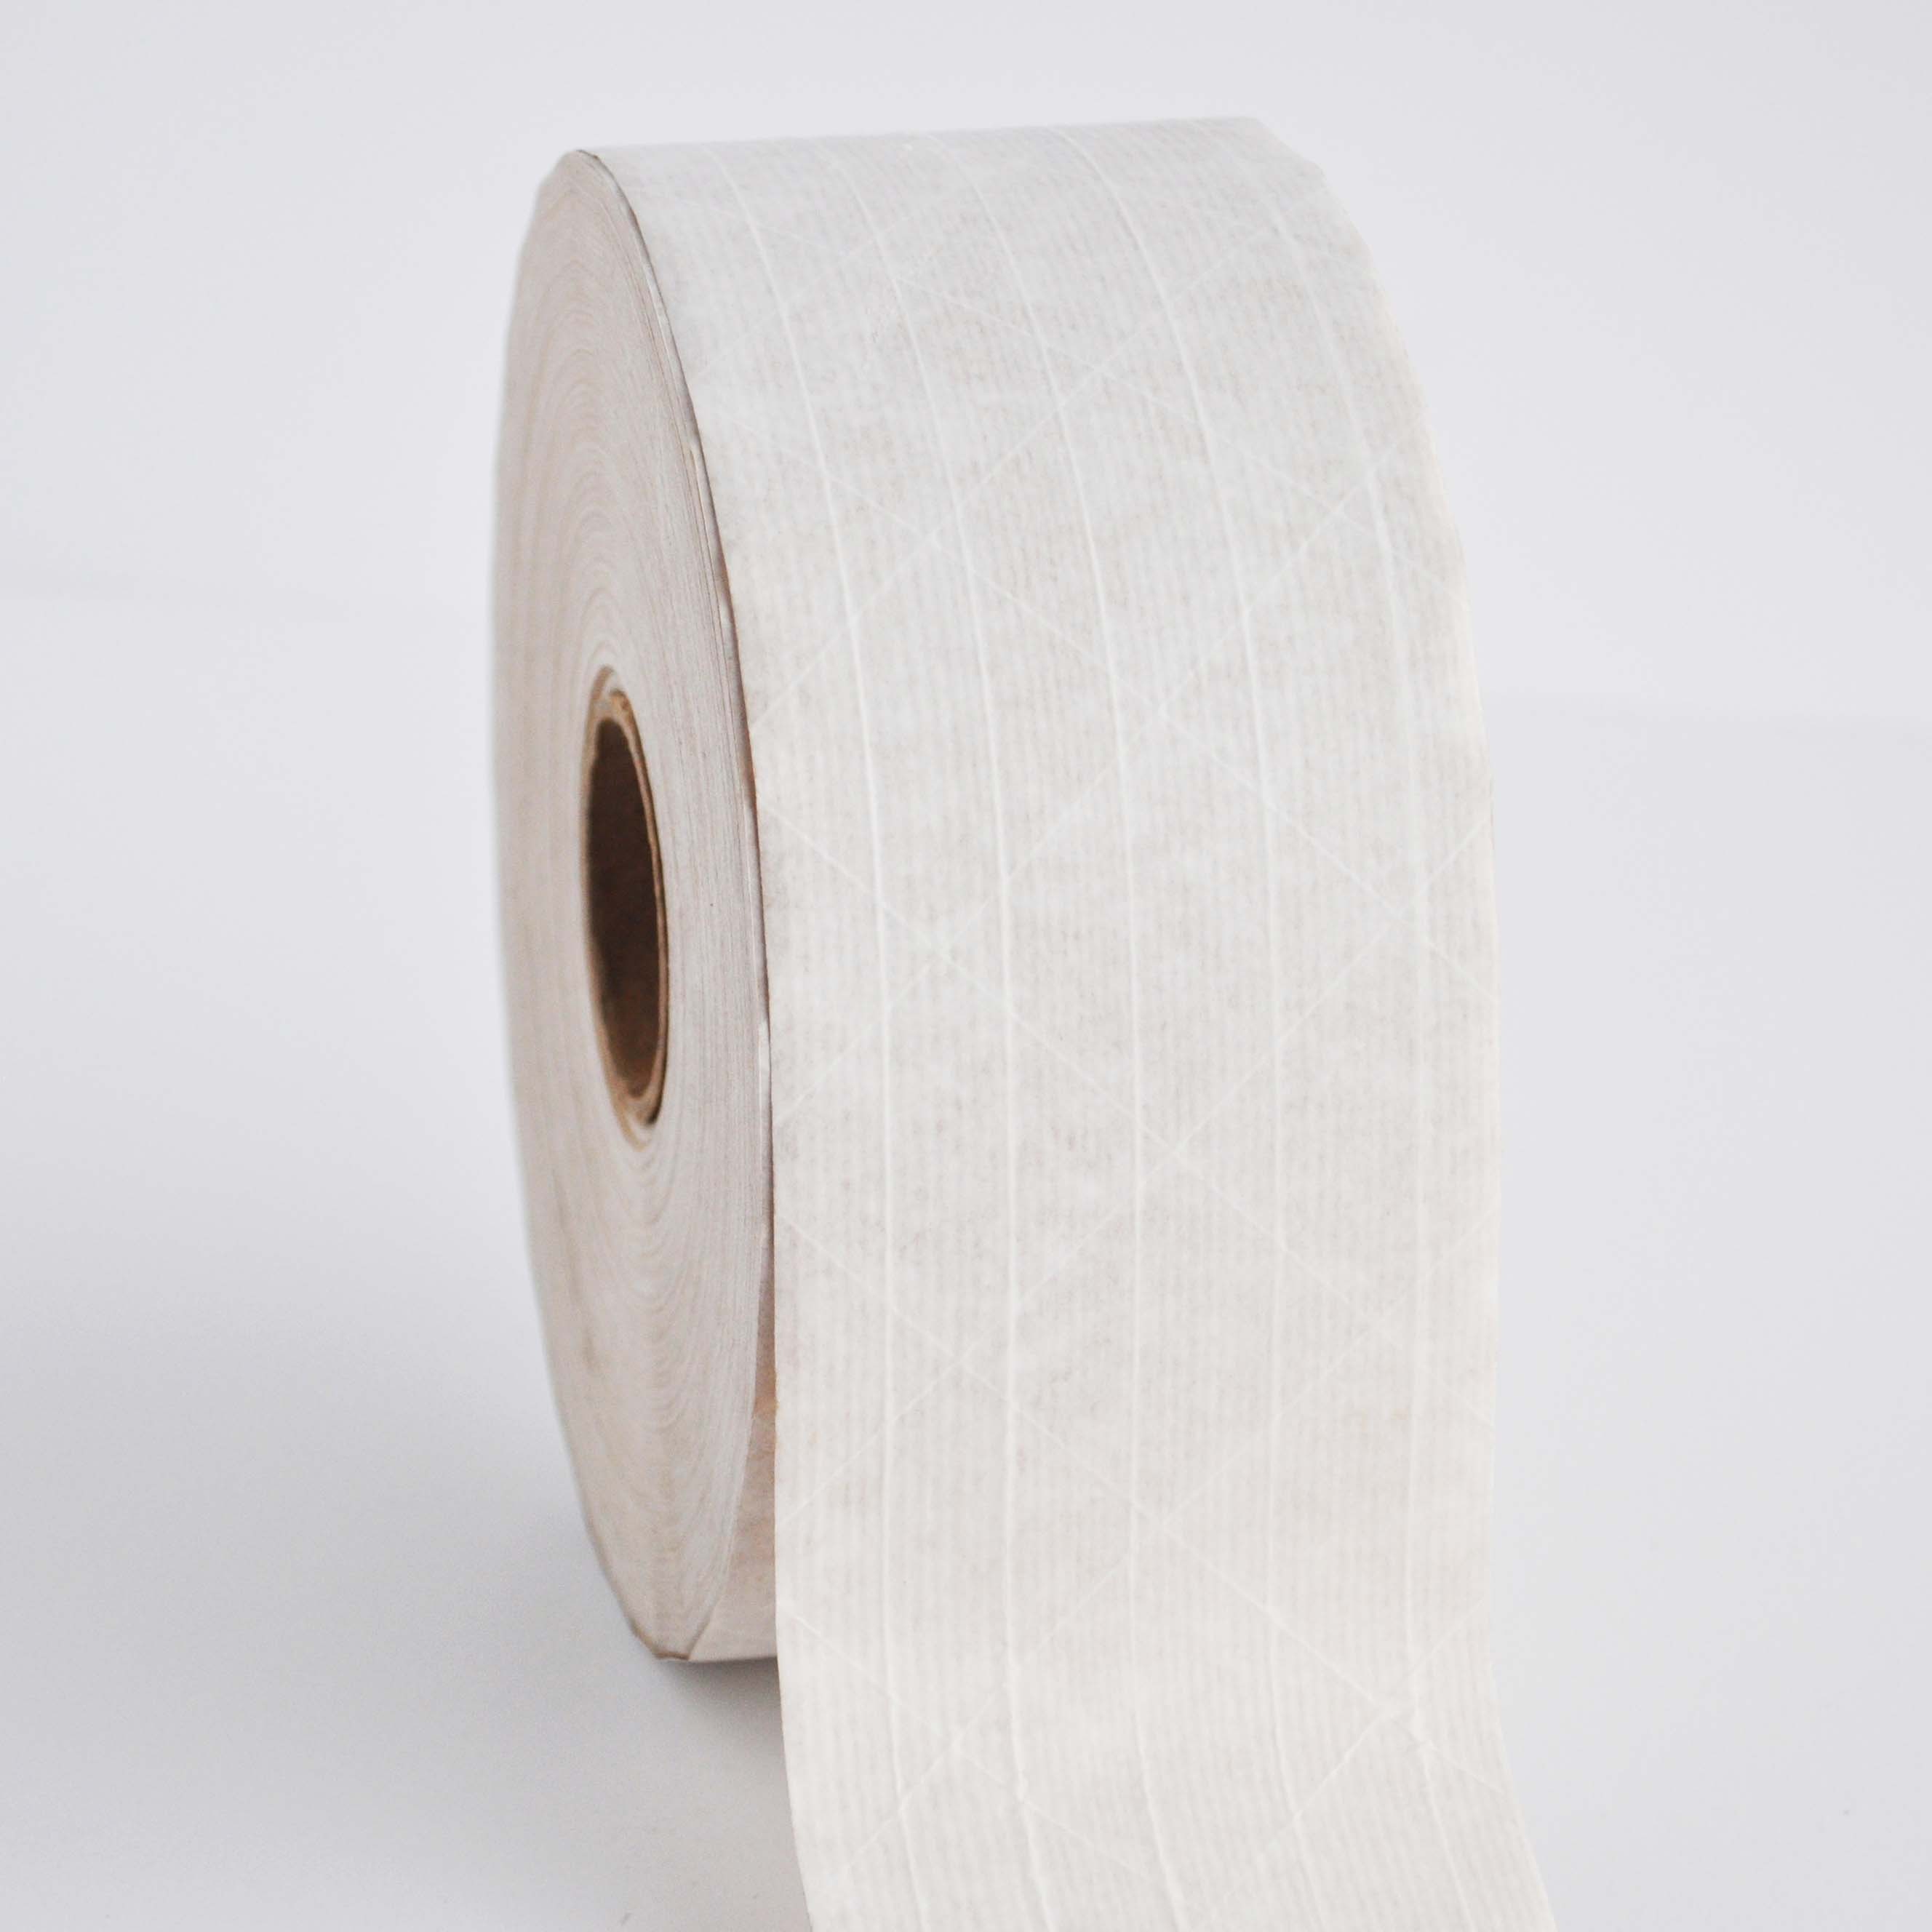 72mm x 450' White Water-Activated Gummed Tape - Economy Grade - 10 Rolls